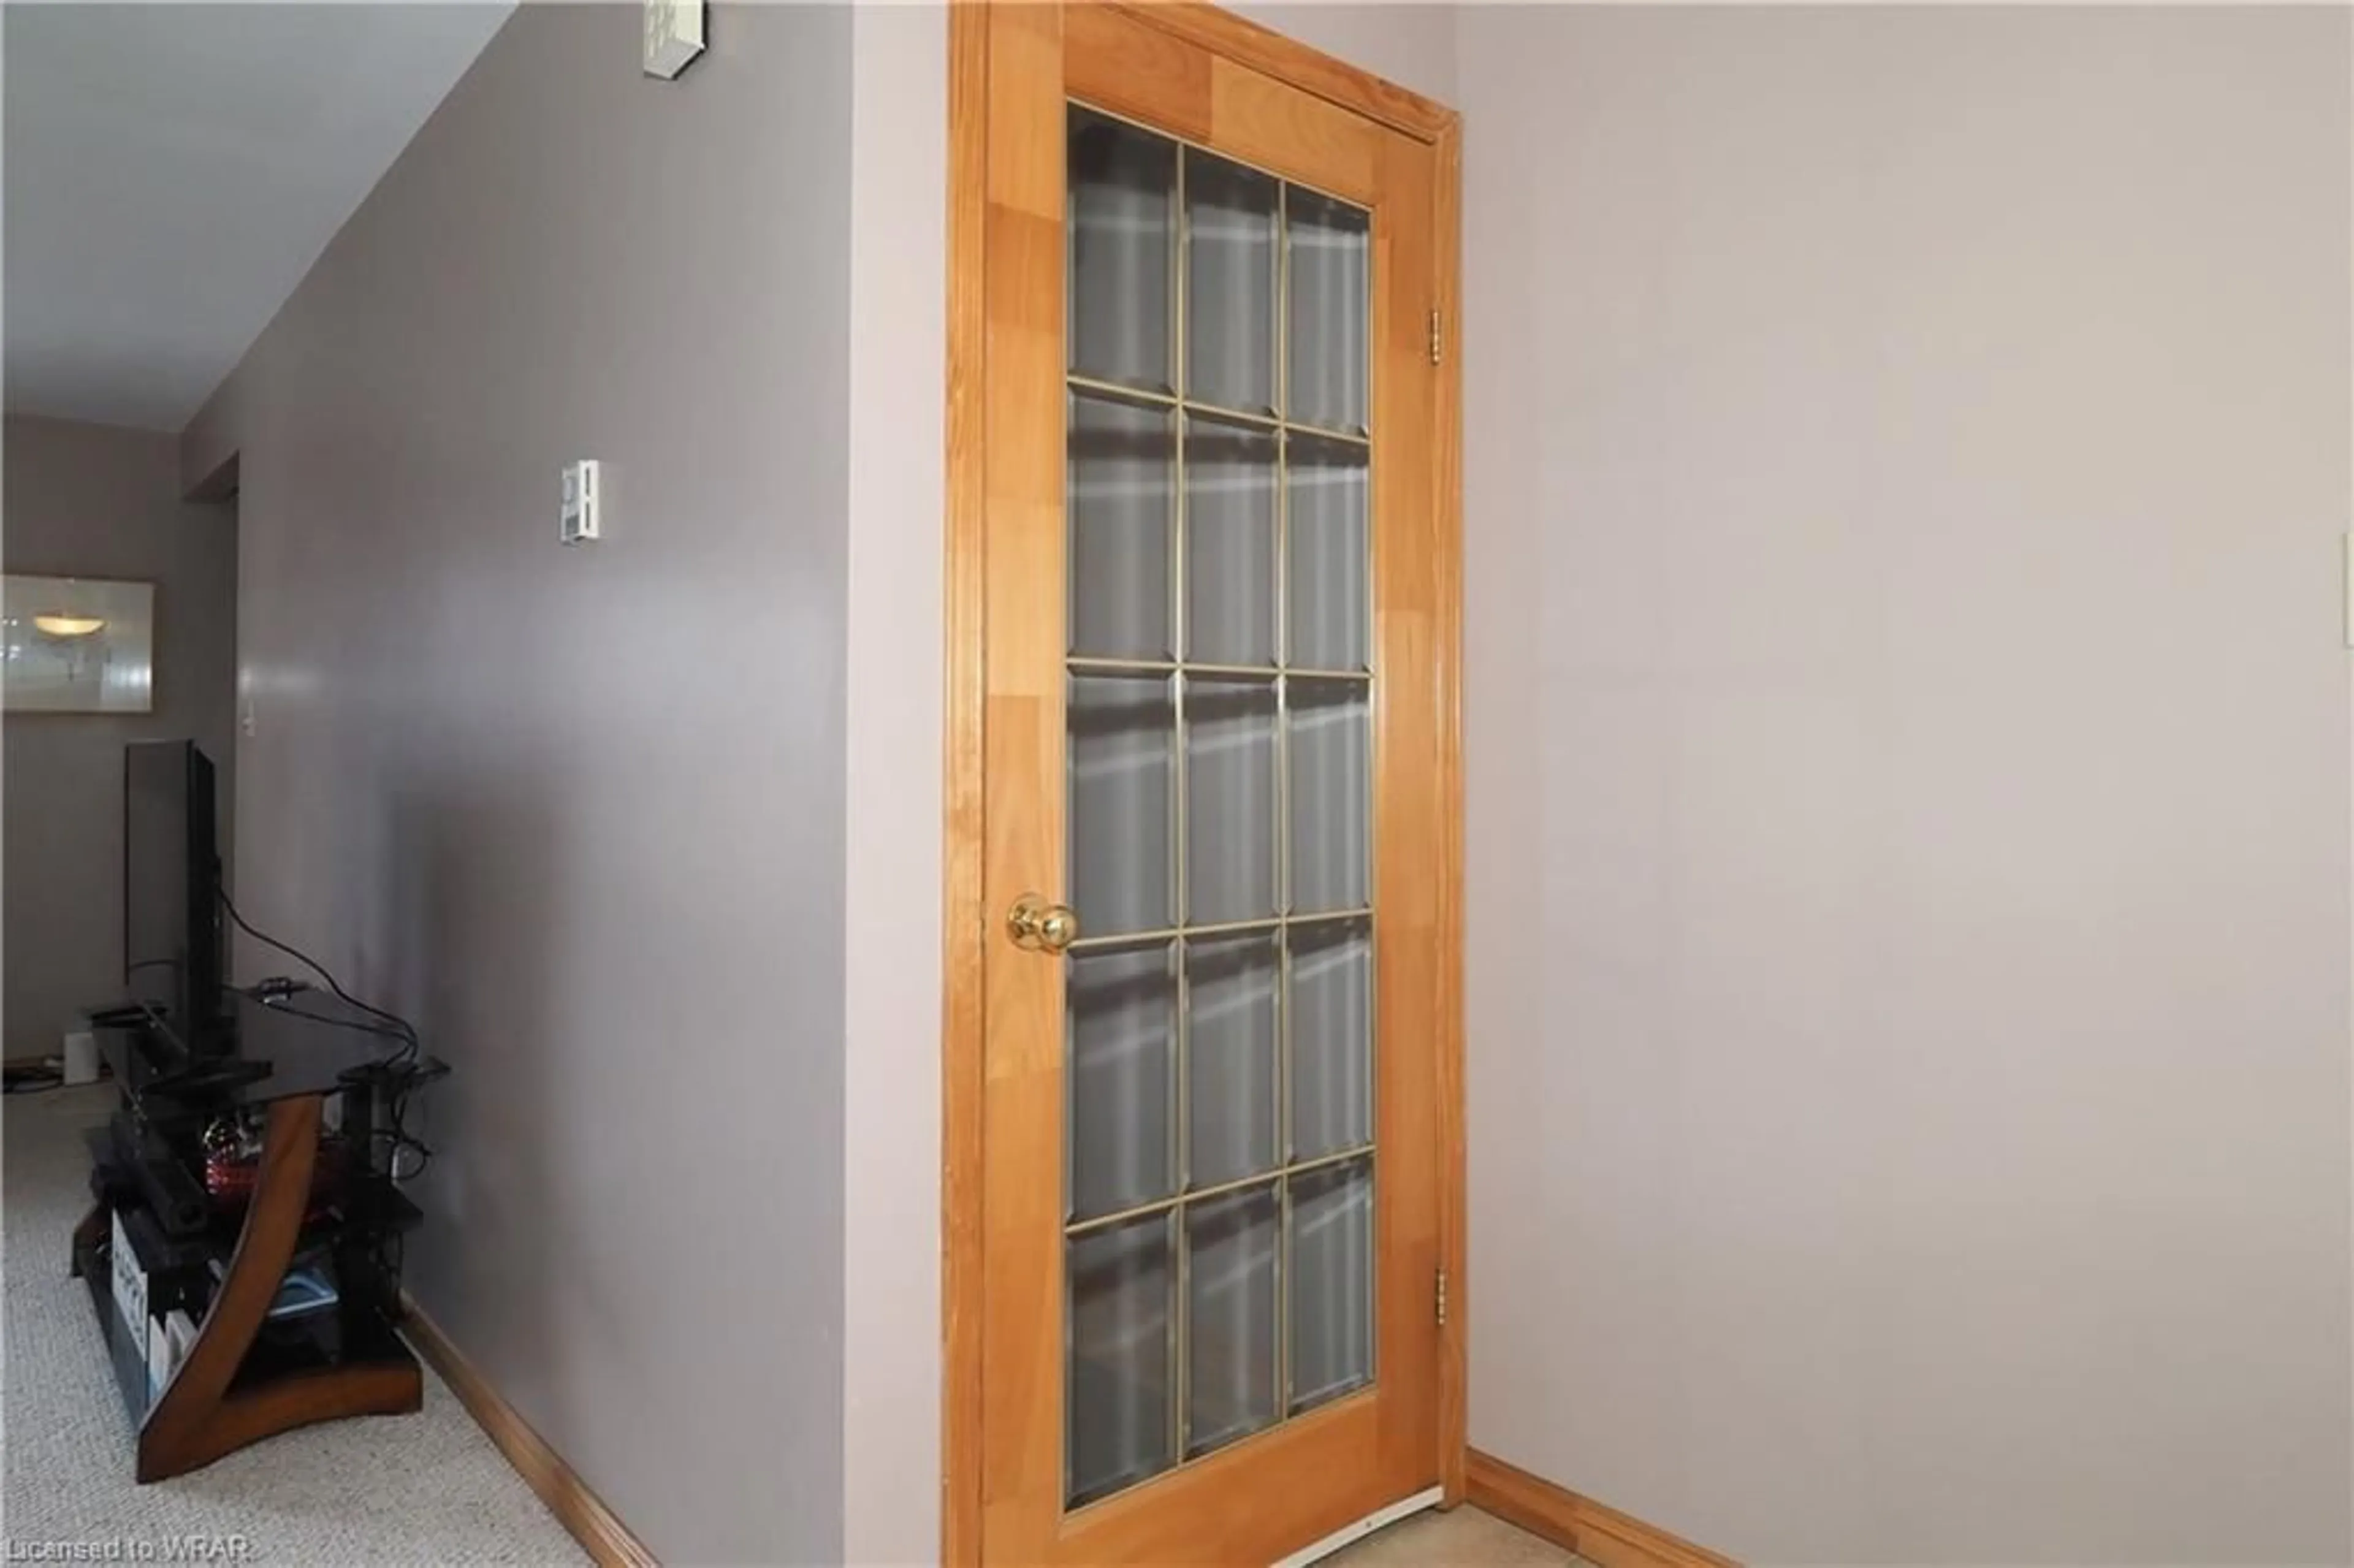 Storage room or clothes room or walk-in closet for 70 Morgan Ave #6, Kitchener Ontario N2A 2M2